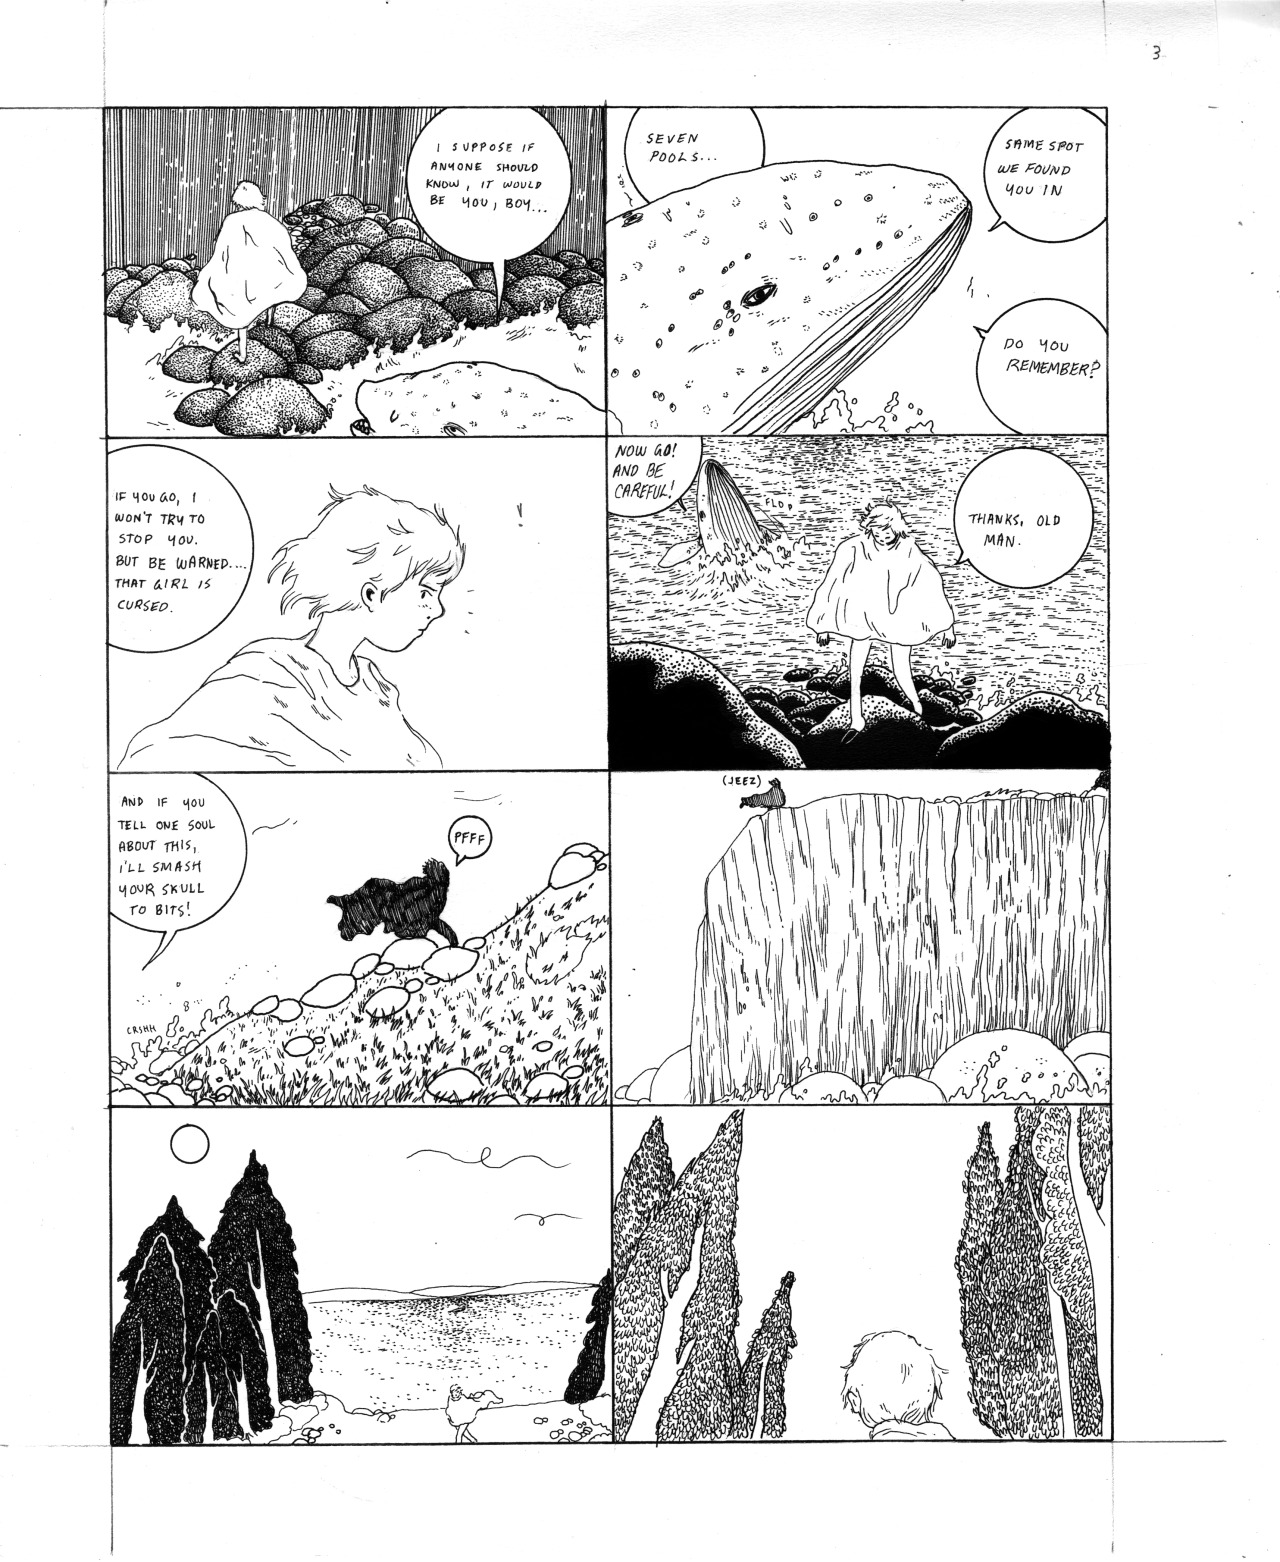 Deluge - Jake Terrell - Page 1